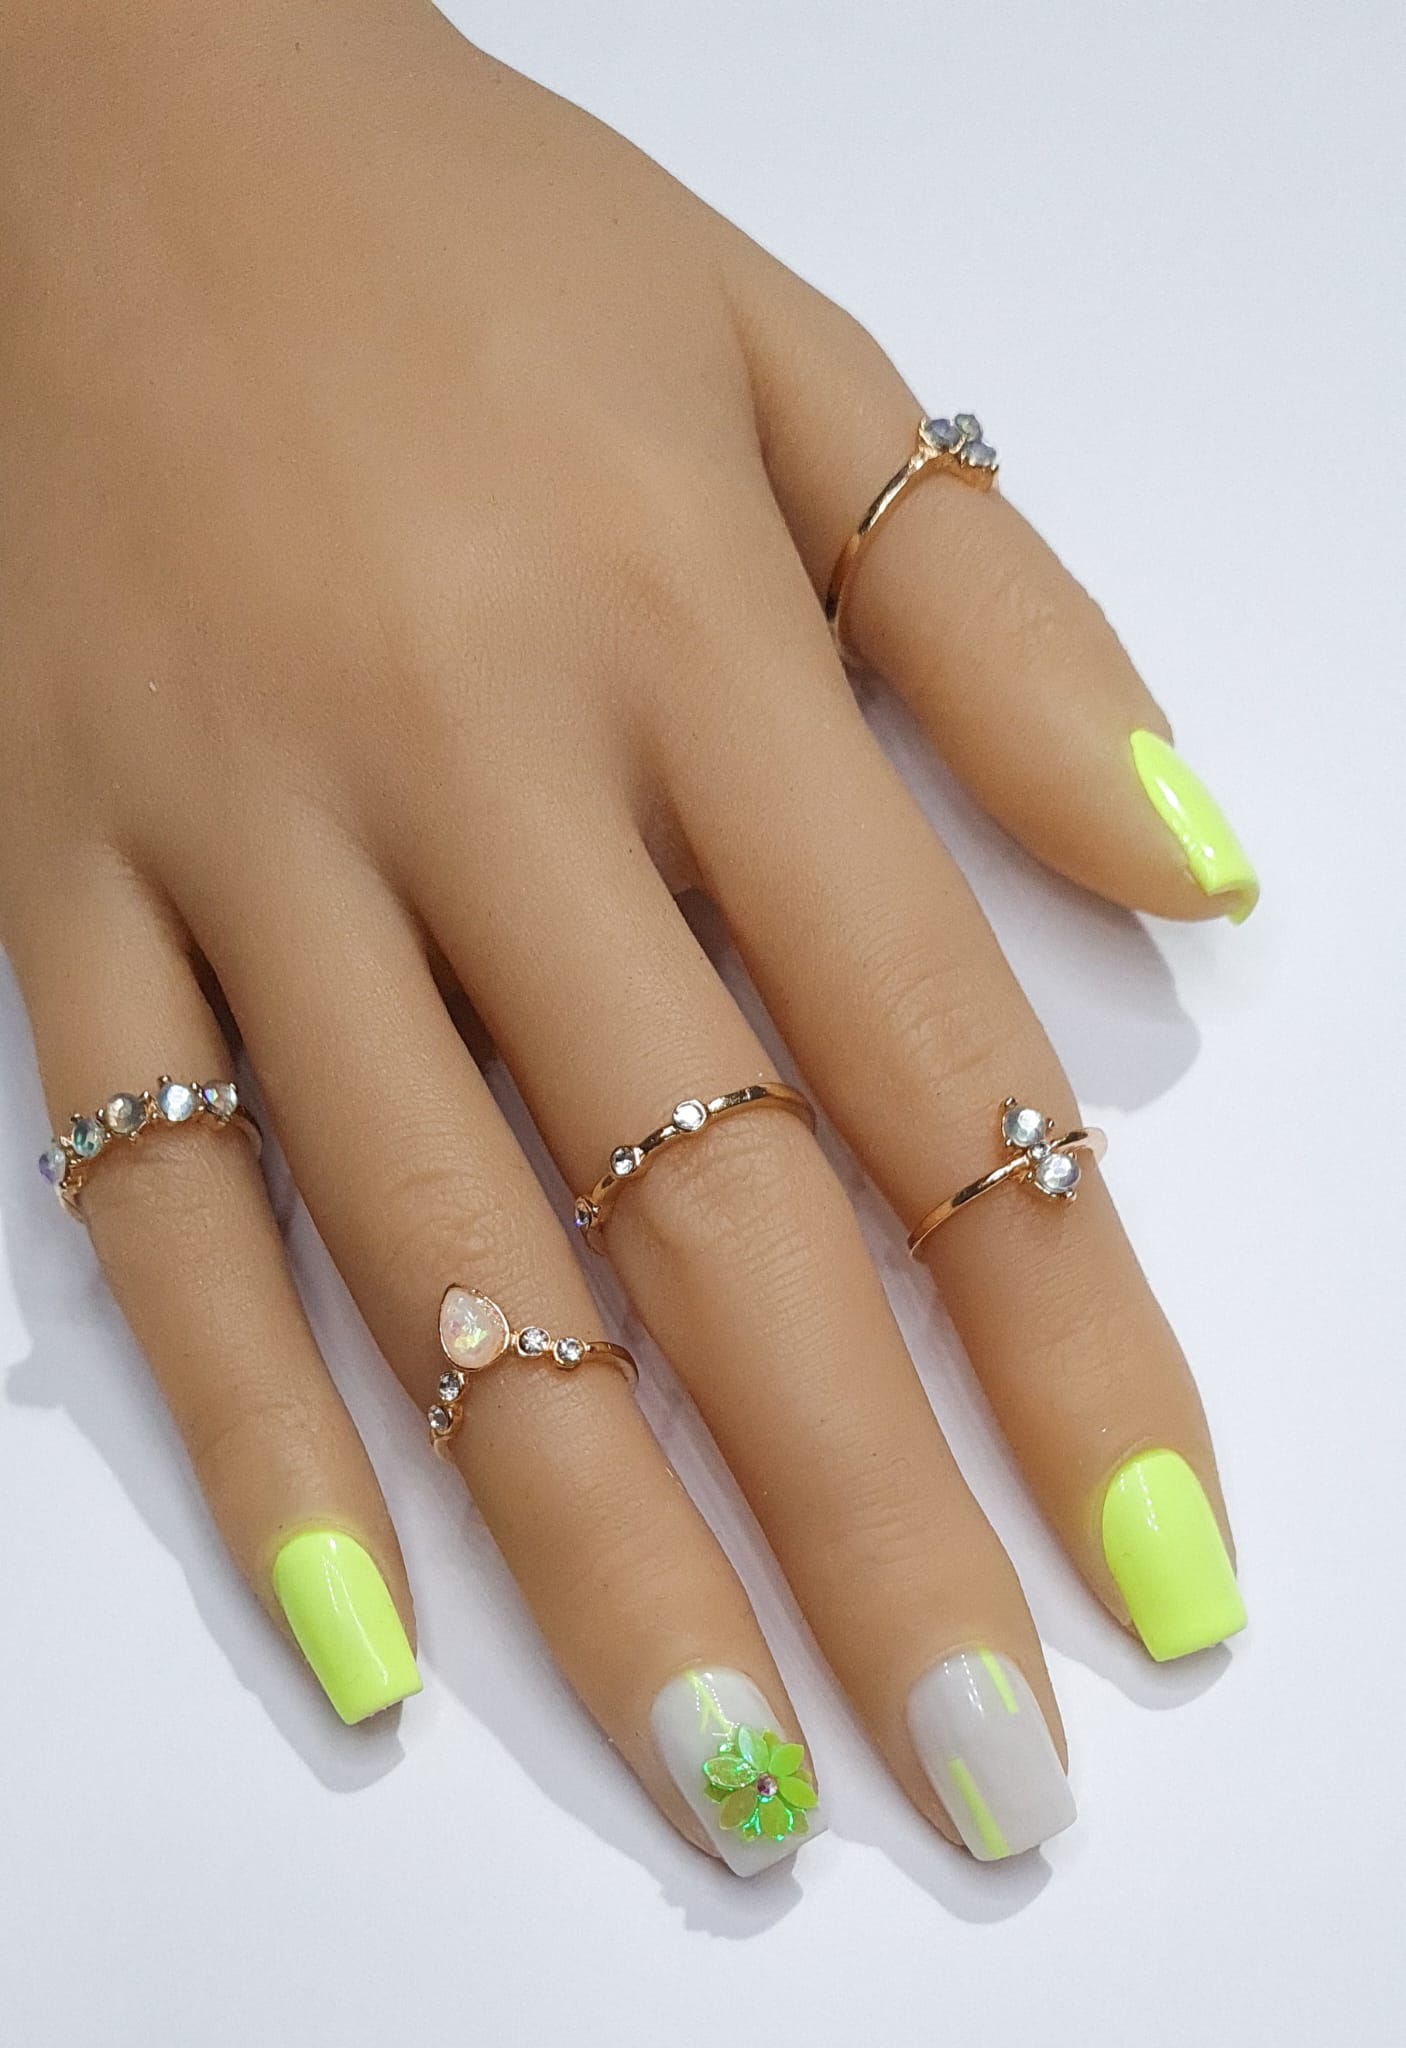  Press On Nails- Bright Vibrant Neon Green/white Green Flower Spring/Summer2023 collection full cover gel tip luxury false nails salon quality hand painted custom made uk